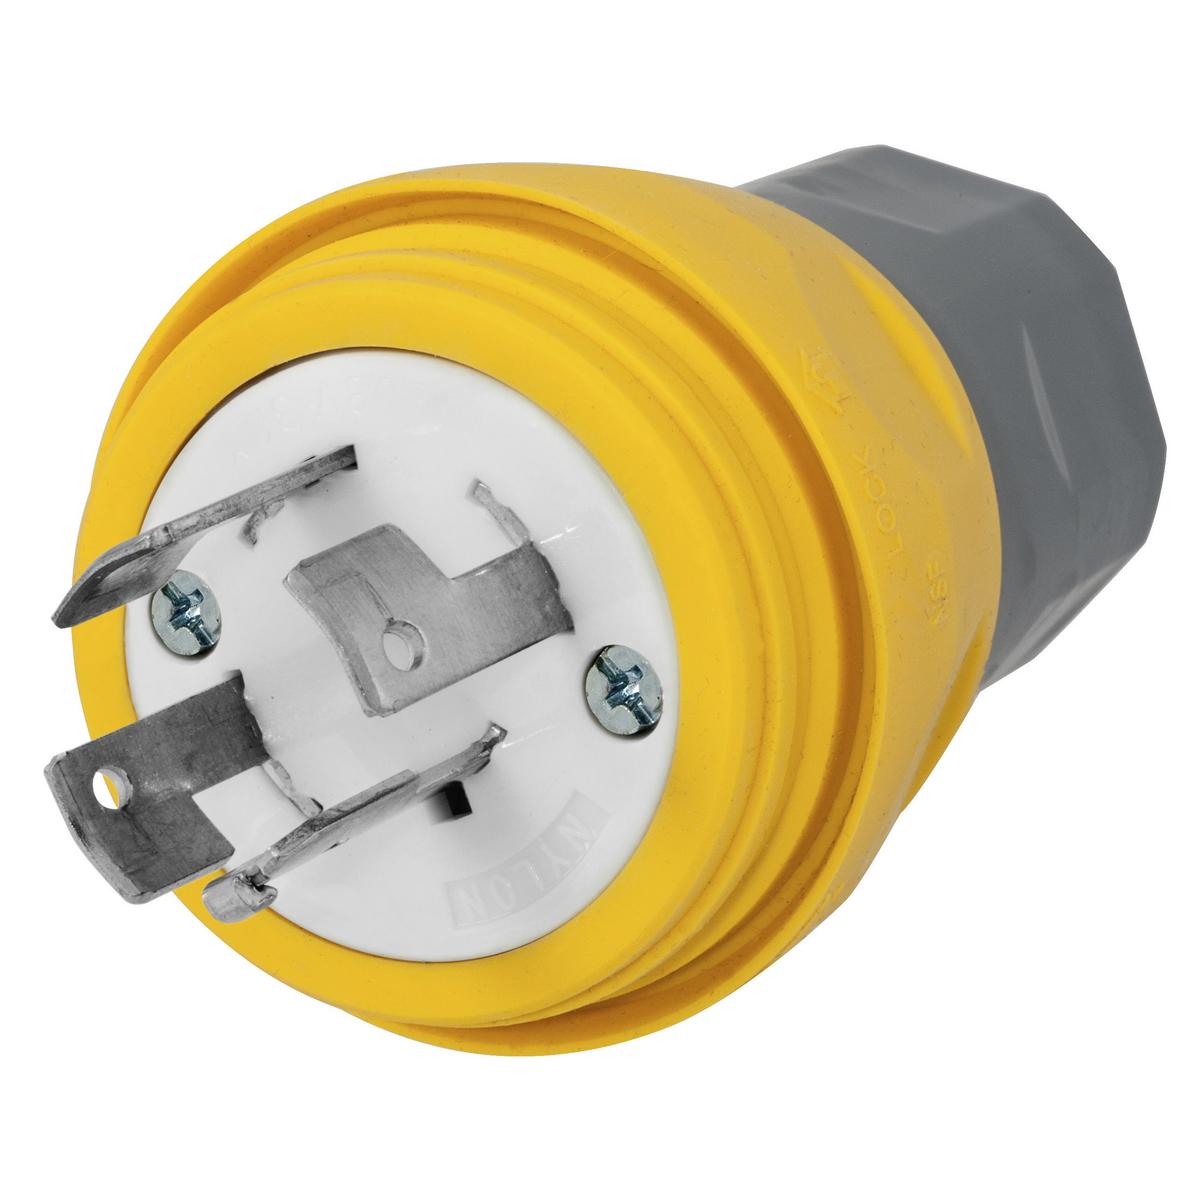 Hubbell HBL28W09 Watertight Devices, Twist-Lock® Plug, 30A, 3 Phase WYE 120/208V AC, 4 Pole, 4 Wire, Thermoplastic elastomer, NON-NEMA, Yellow  ; Smooth body design minimizes collection points simplifying the wash down process ; Strain relief nut always seals on the body,